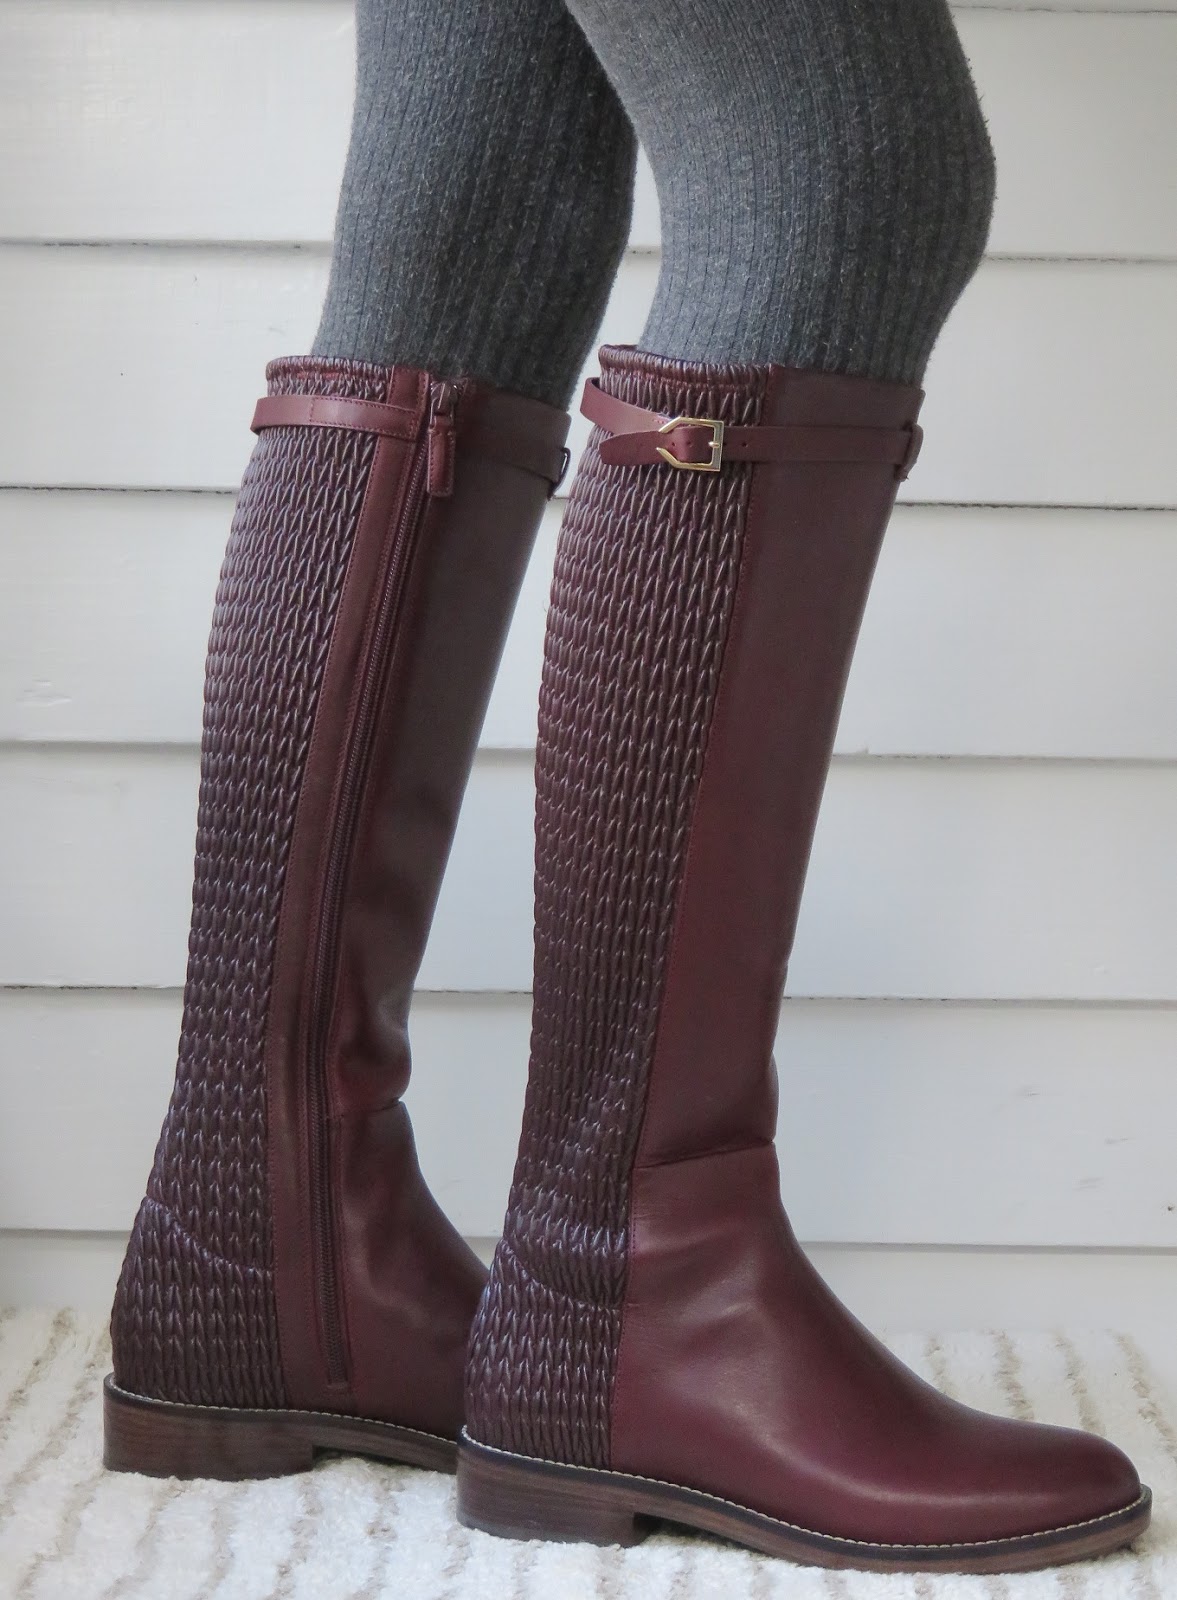 skinny riding boots